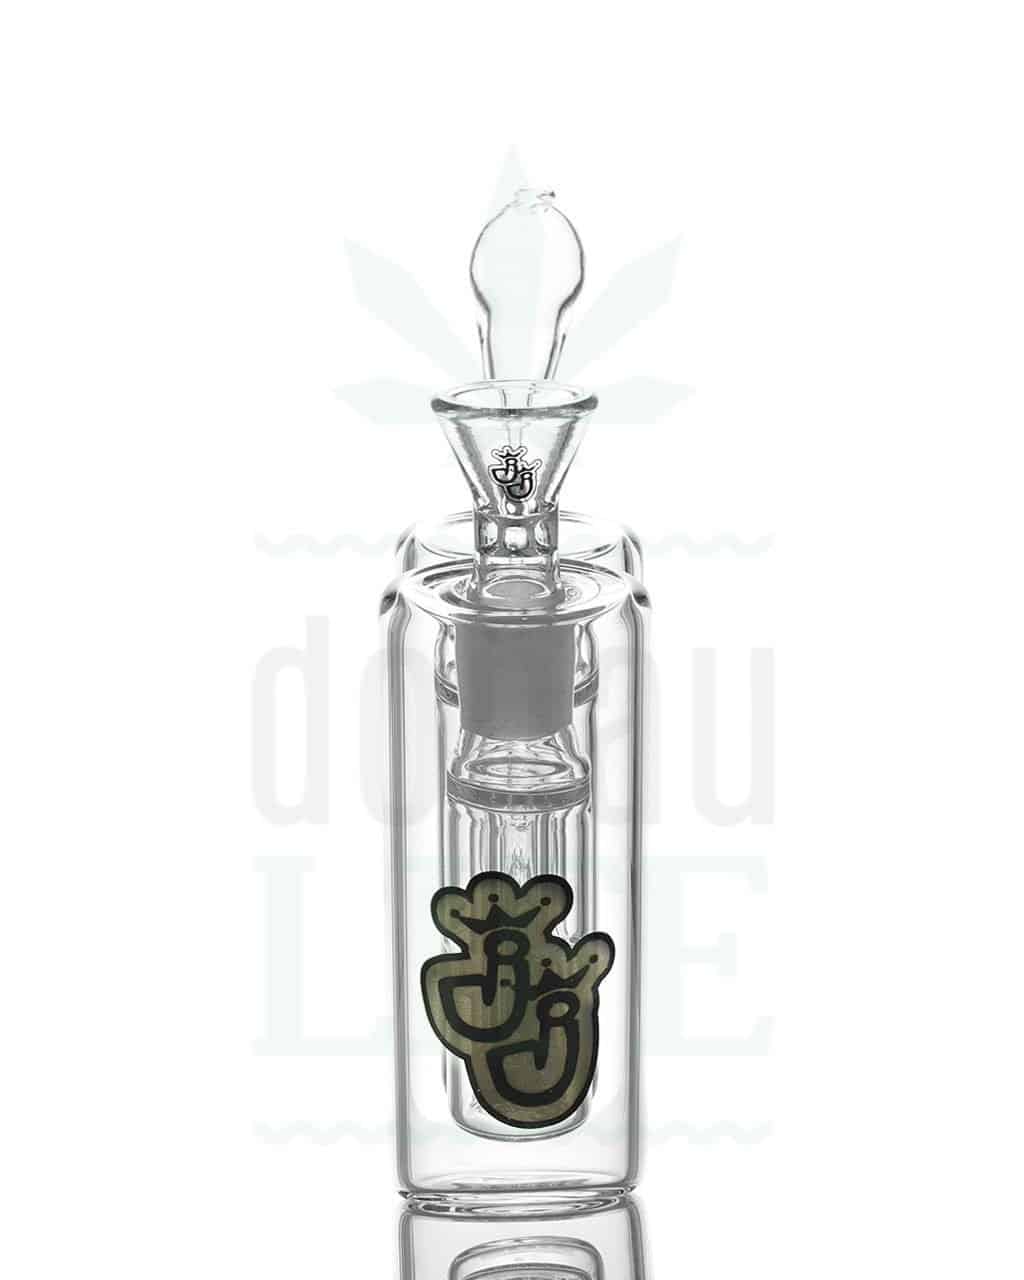 Purpipes Jelly Joker Bubble Joe with rod and seven-arm percolator